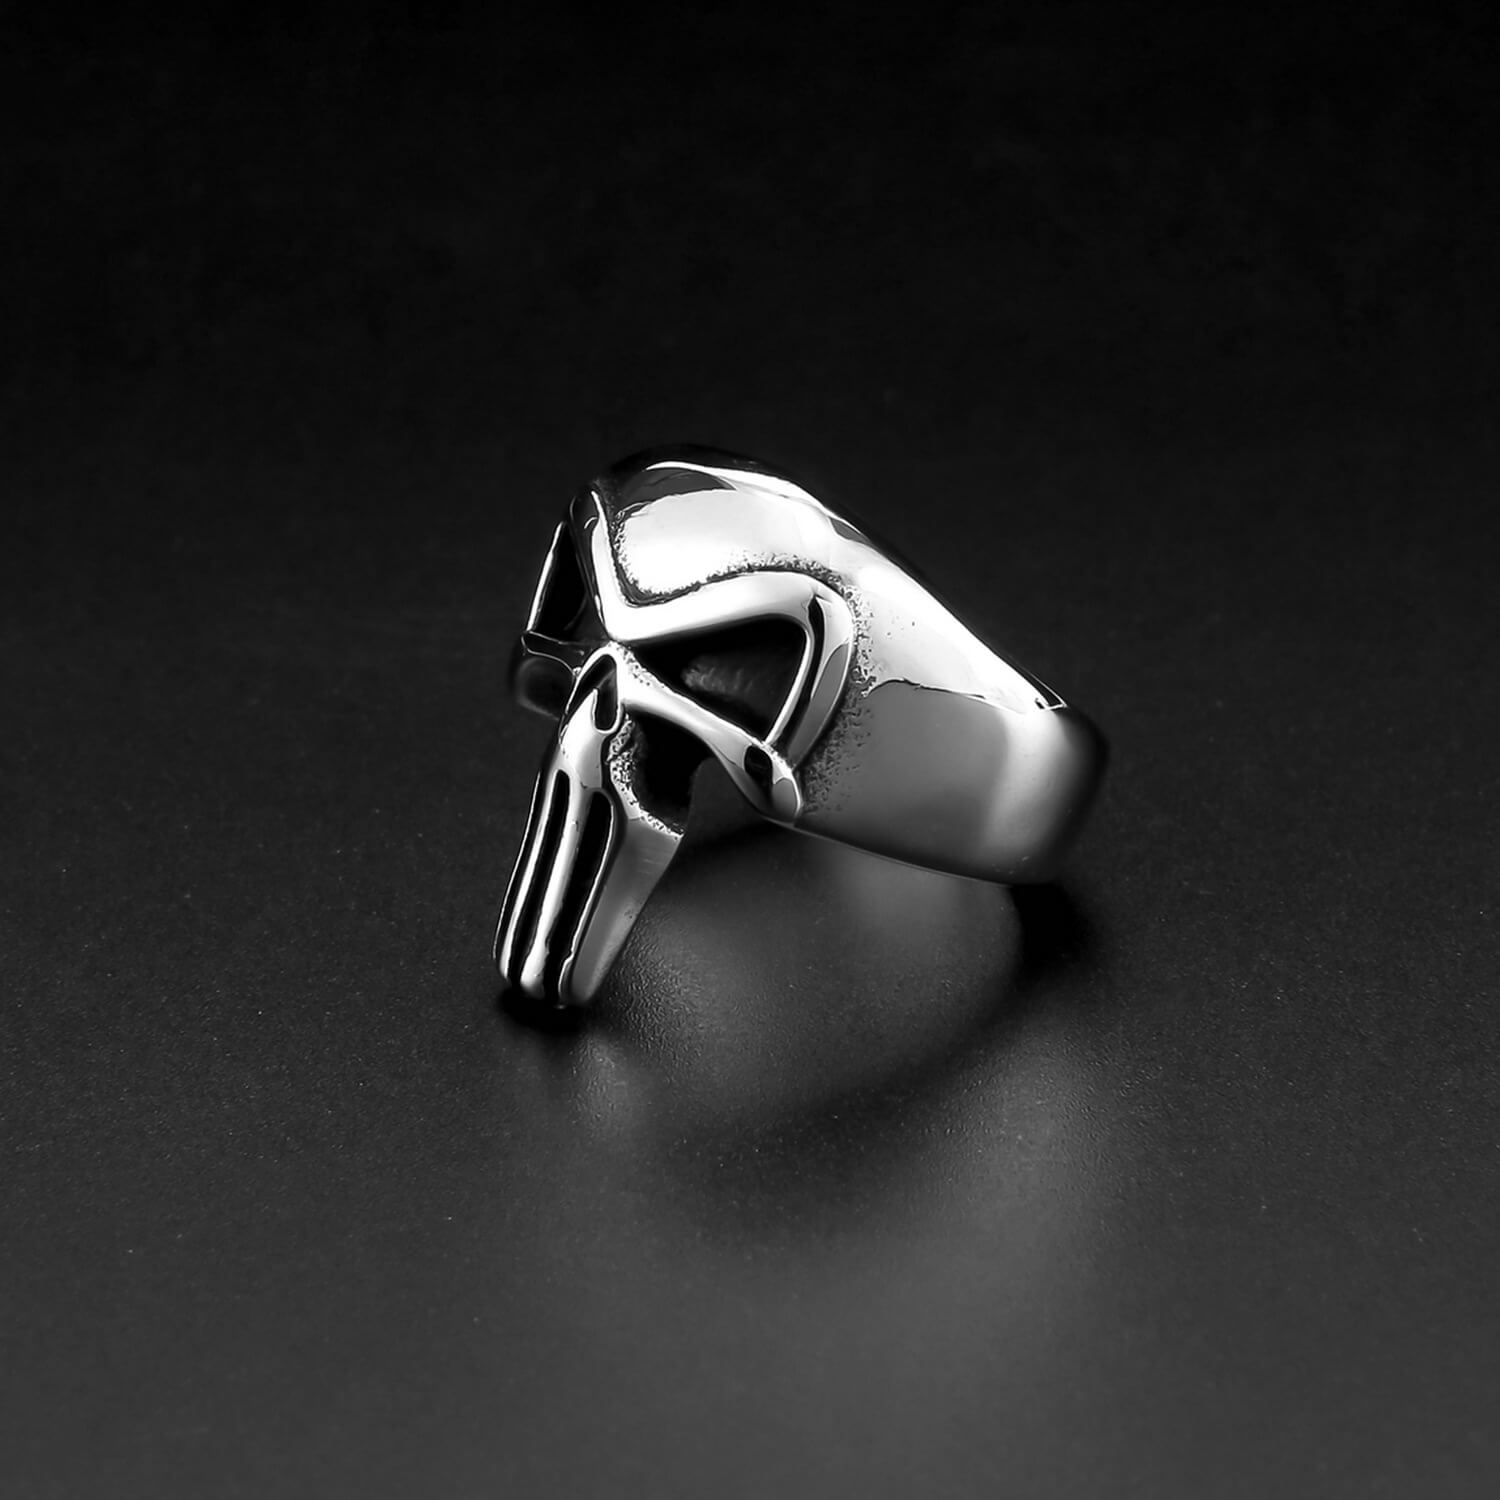 China Fashion Male Jewelry Rings 316L Stainless Steel Skull Punisher ...